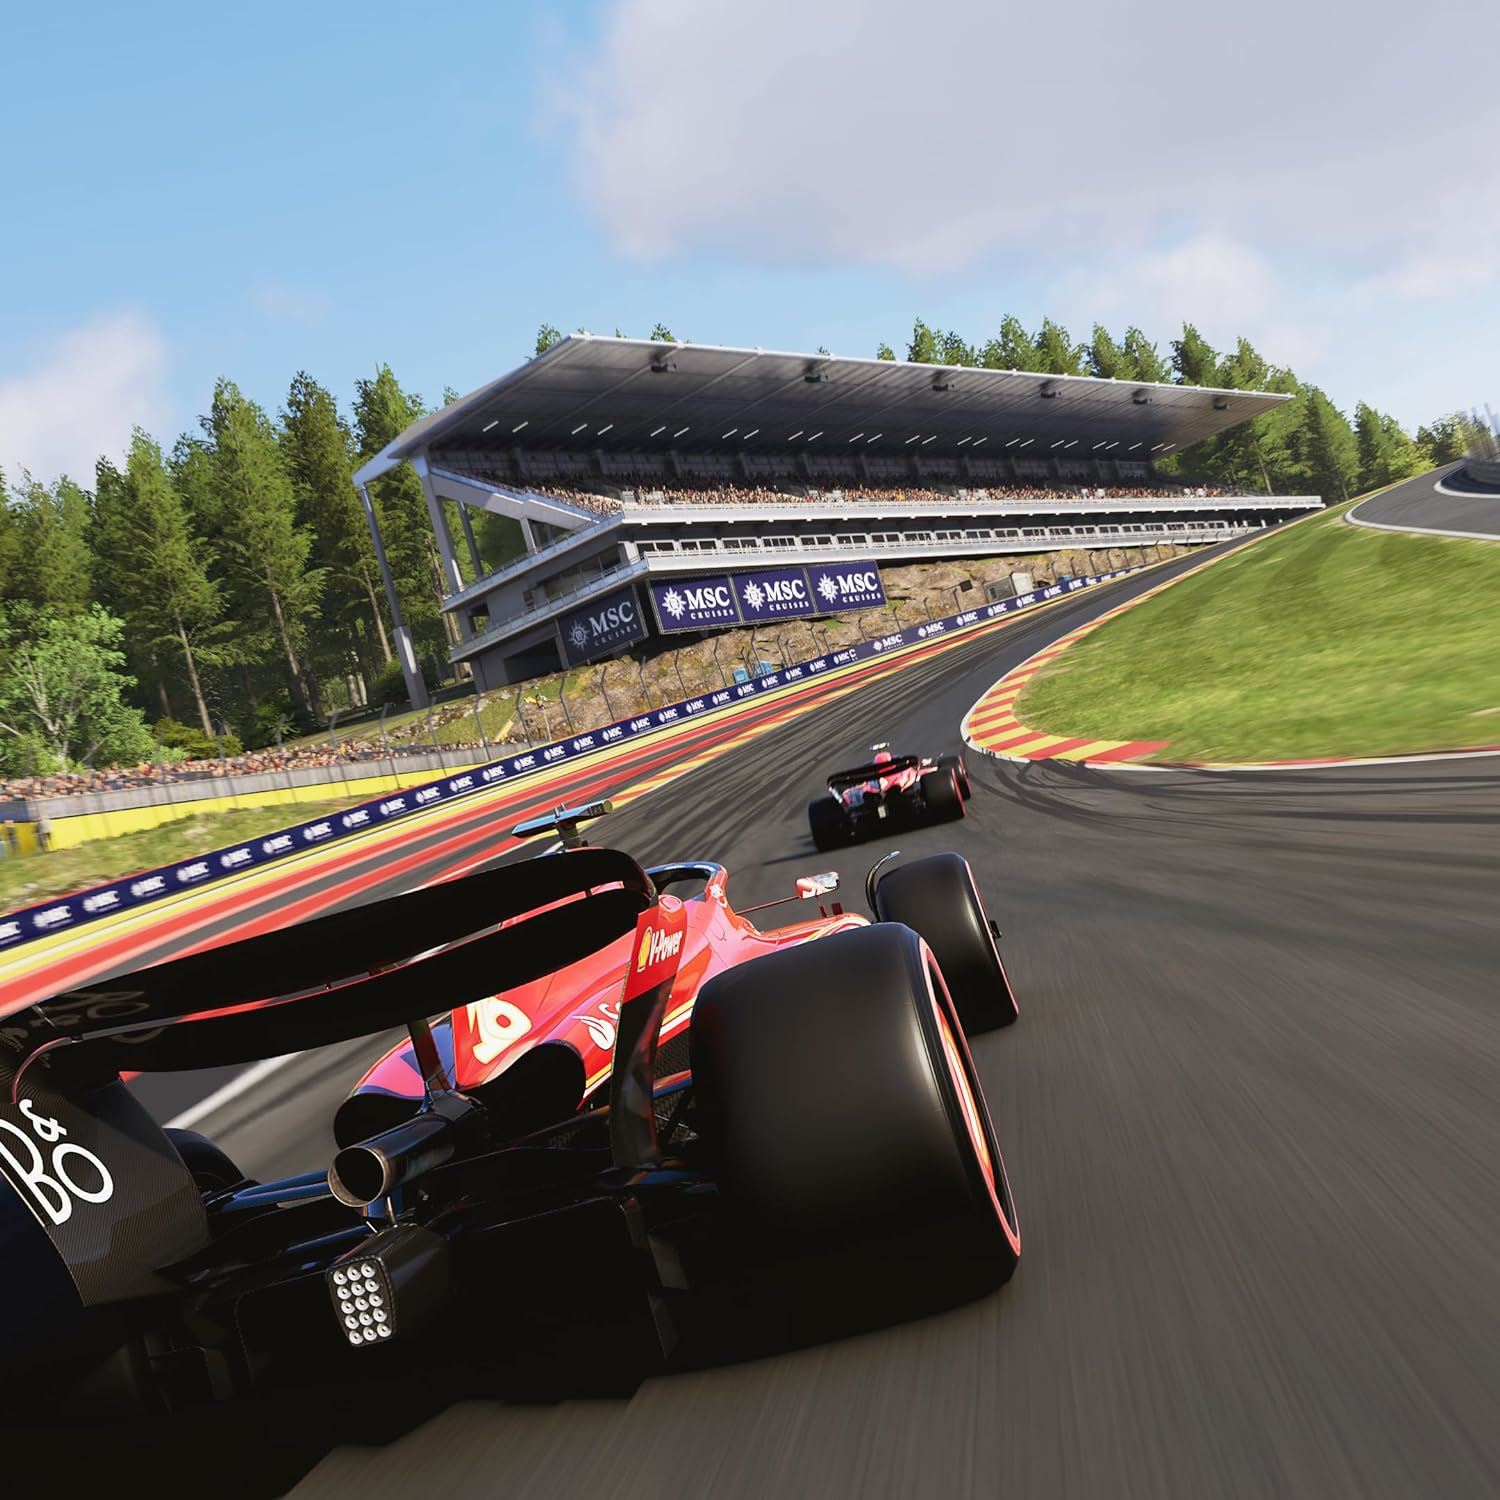 F1 24 Standard Edition PS4 Game